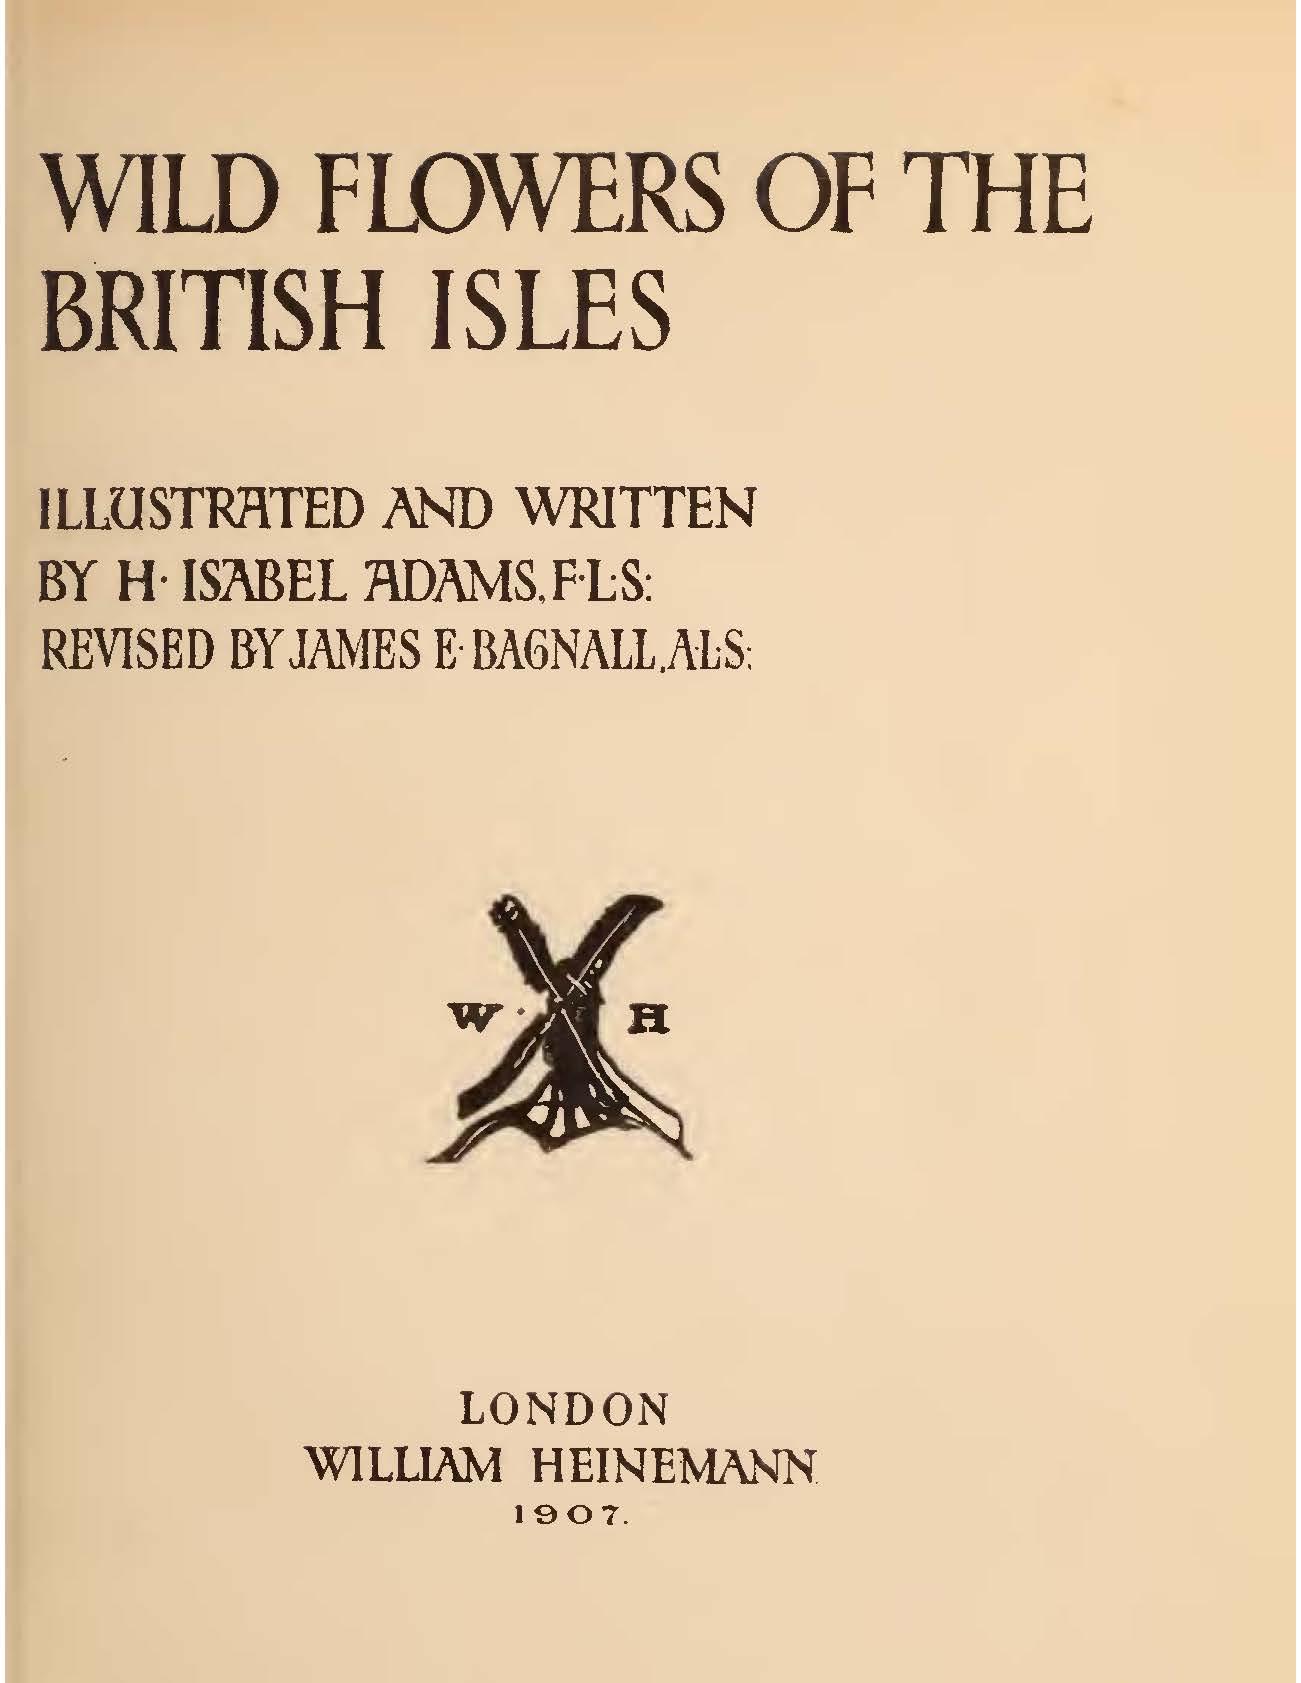 Wild Flowers of the British Isles Title Page